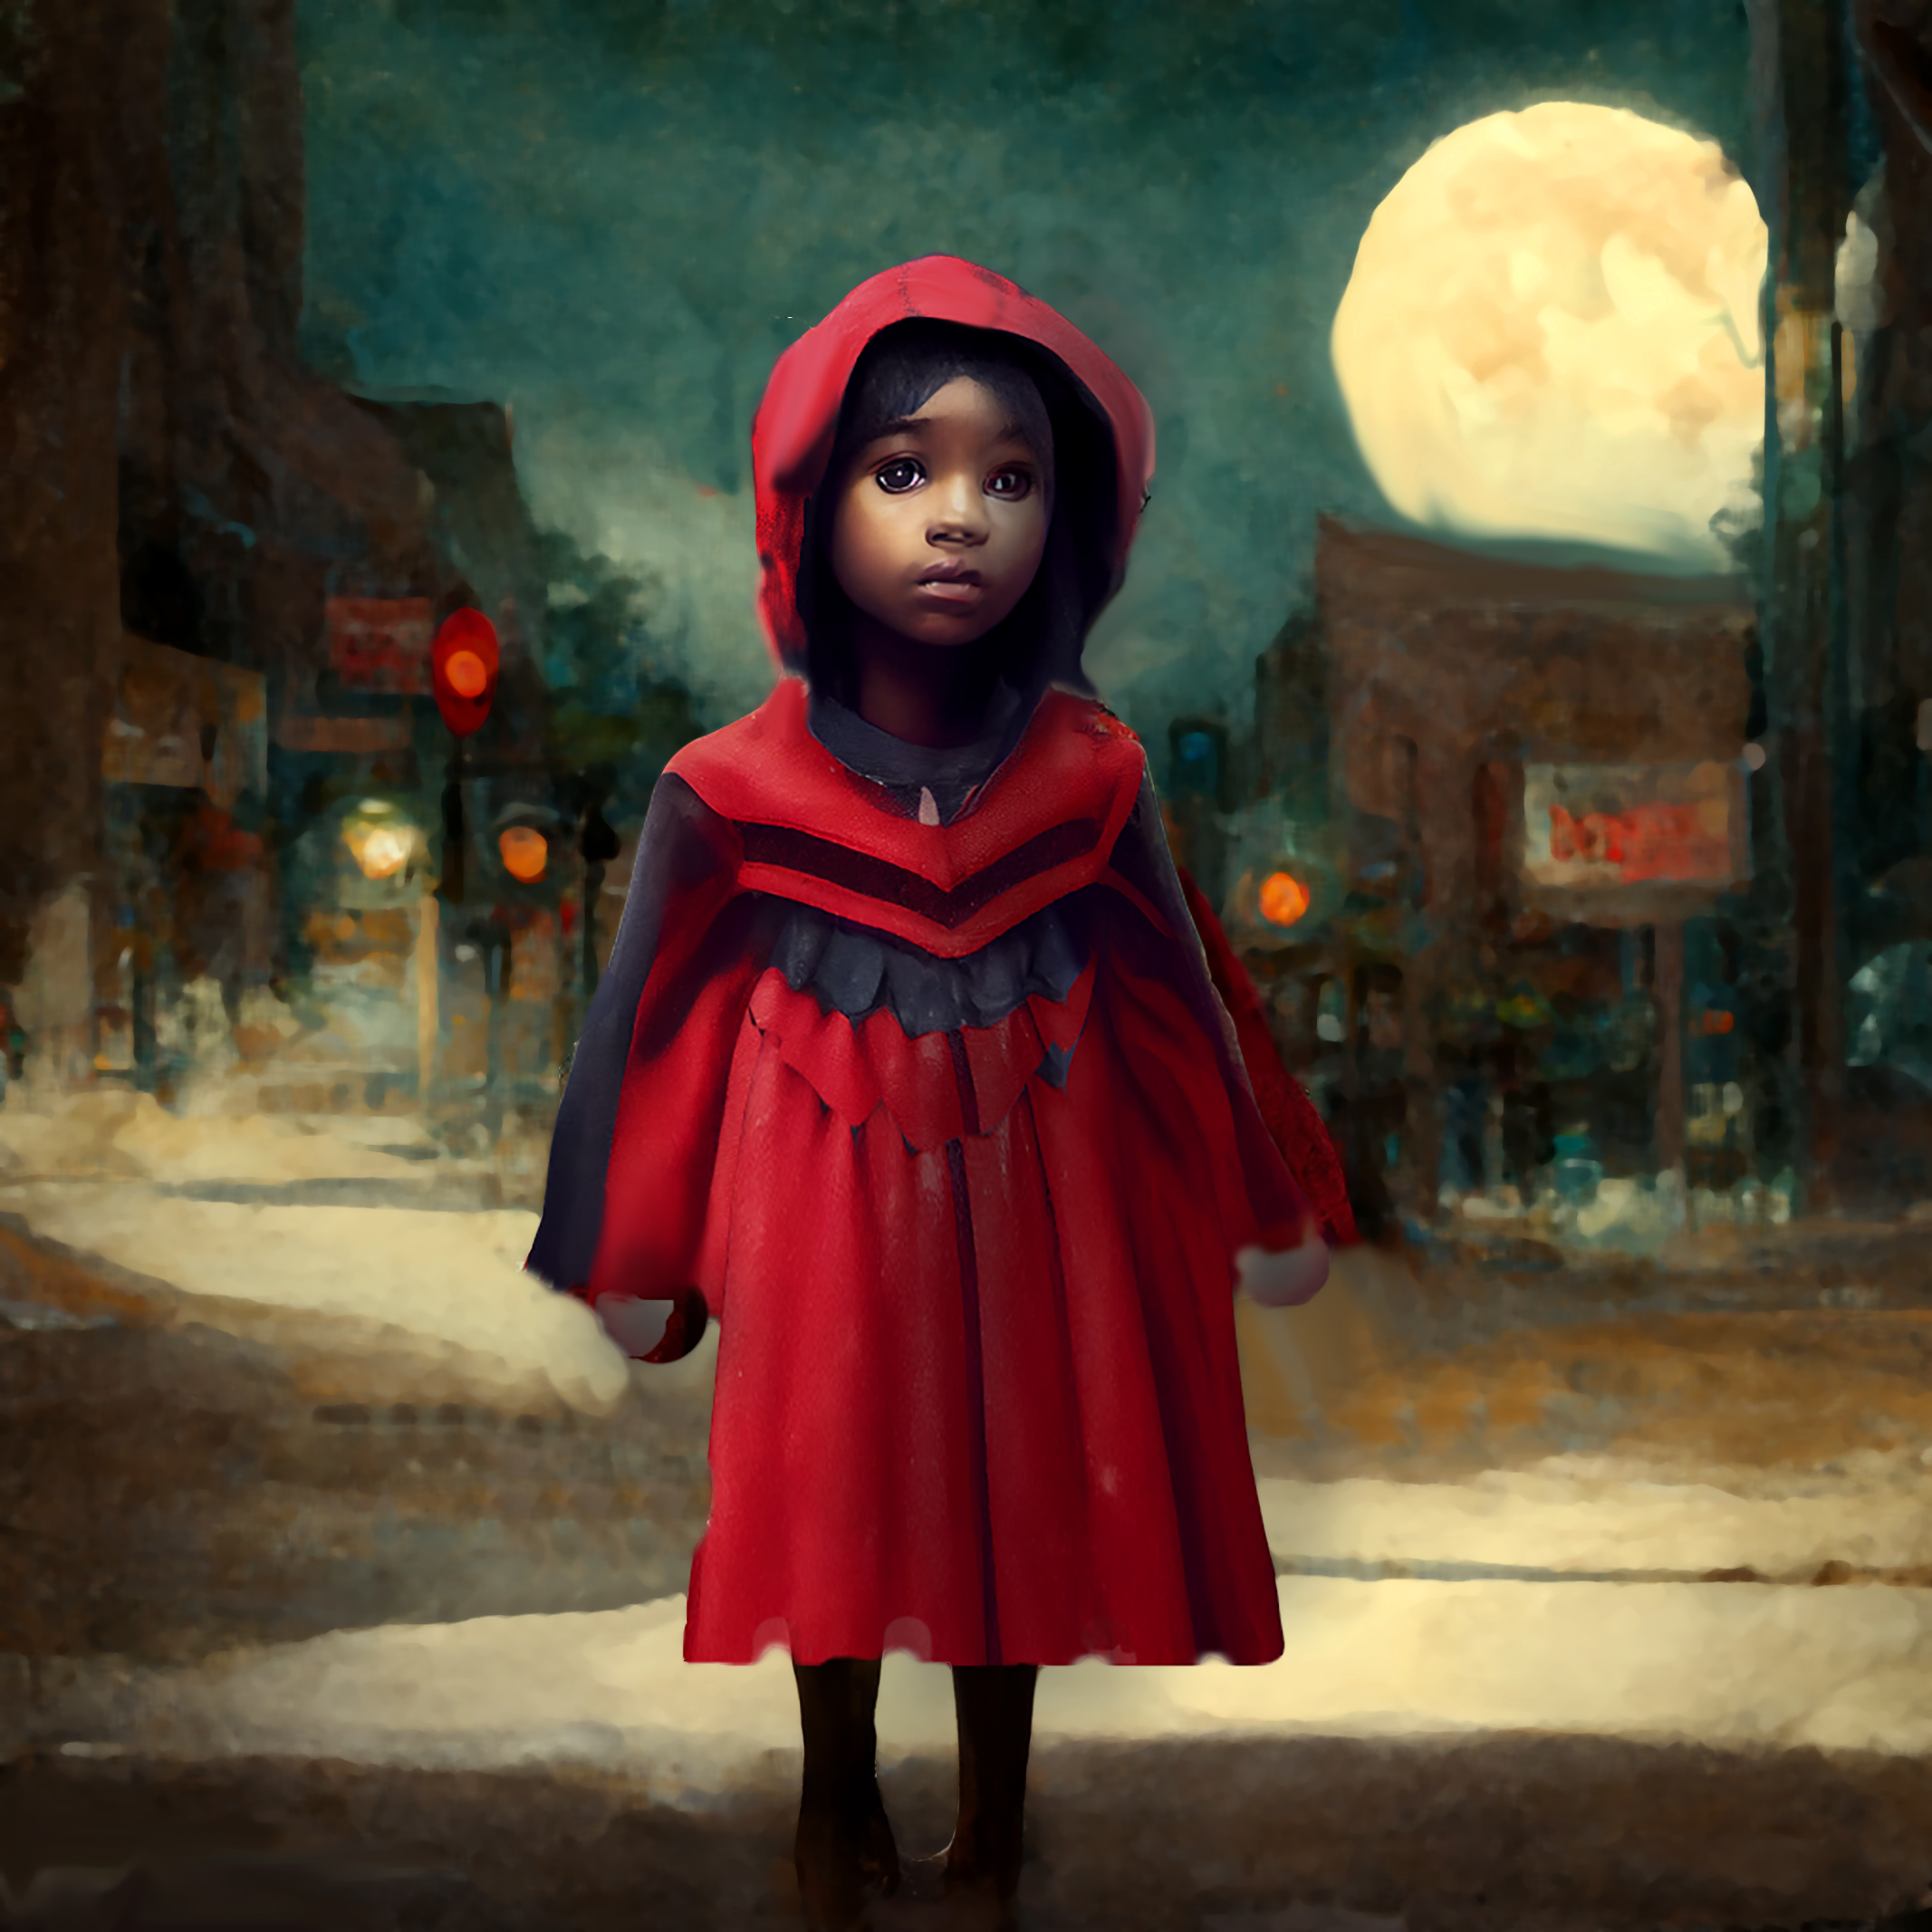 Girl dressed at Little Red Riding Hood on a small town Main Street at night